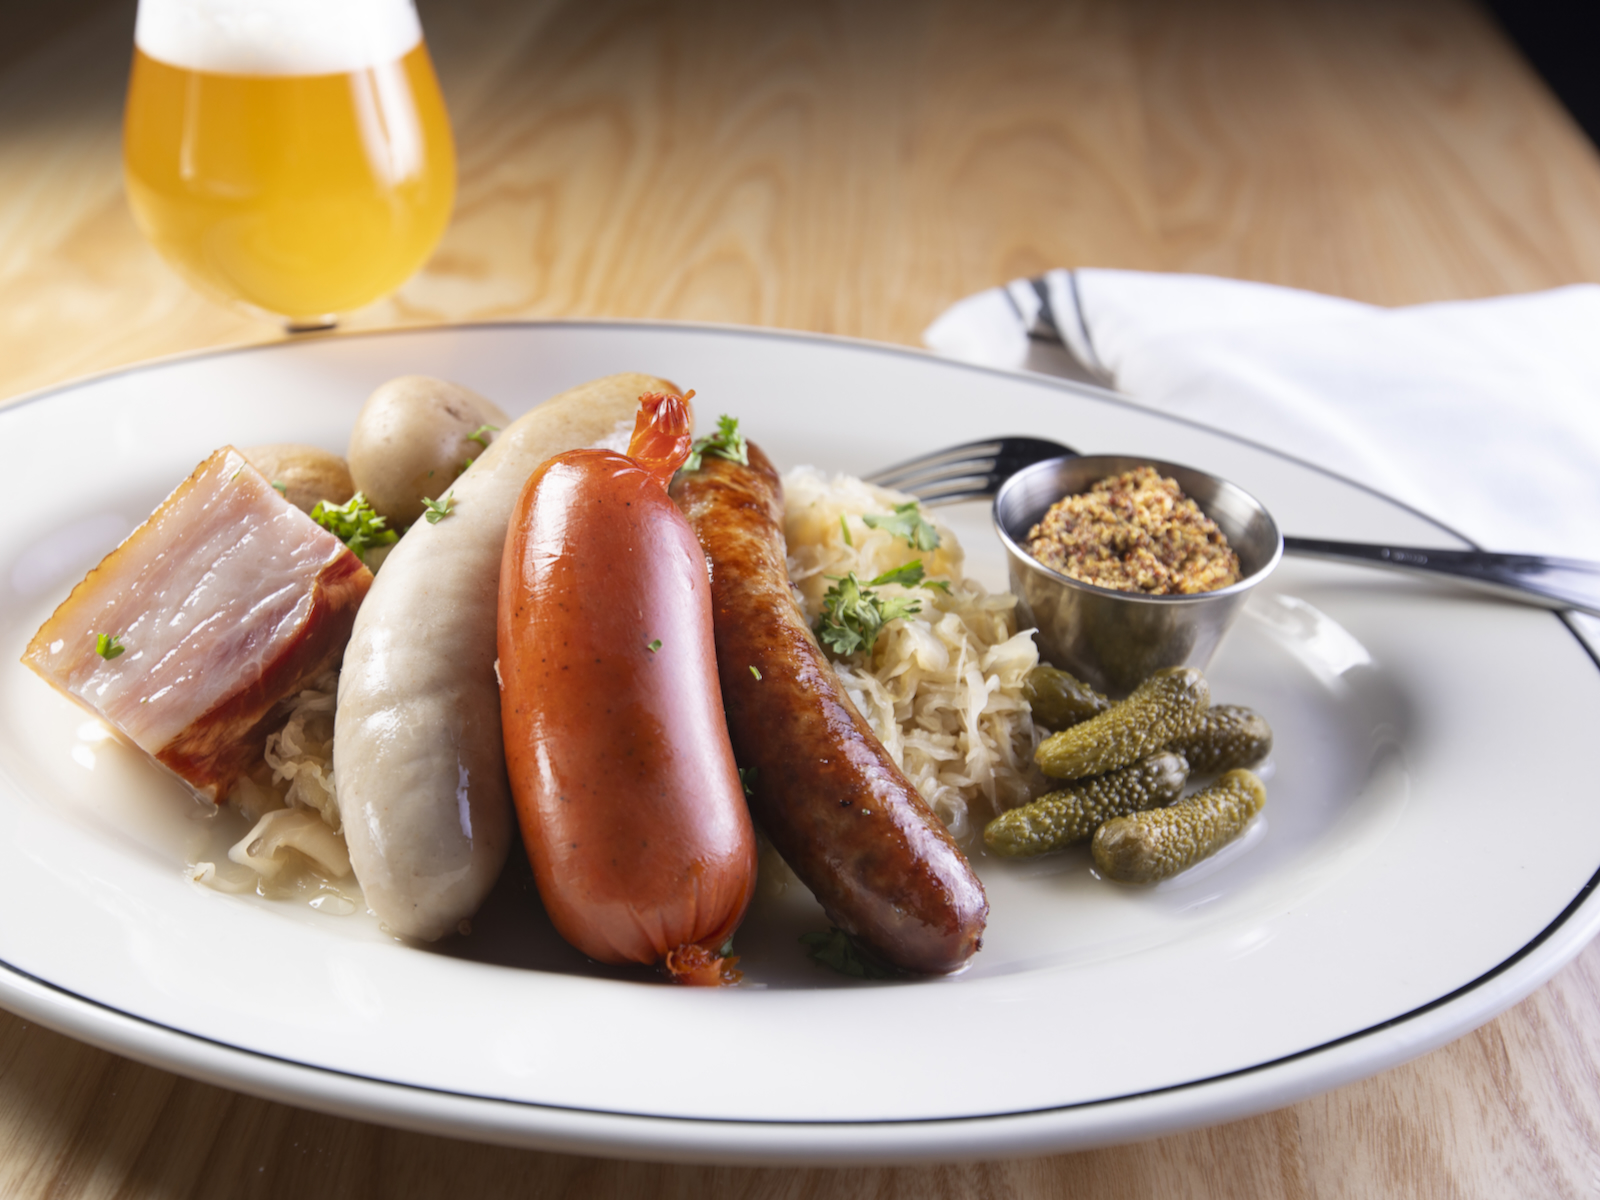 The Best of the Wurst Platter